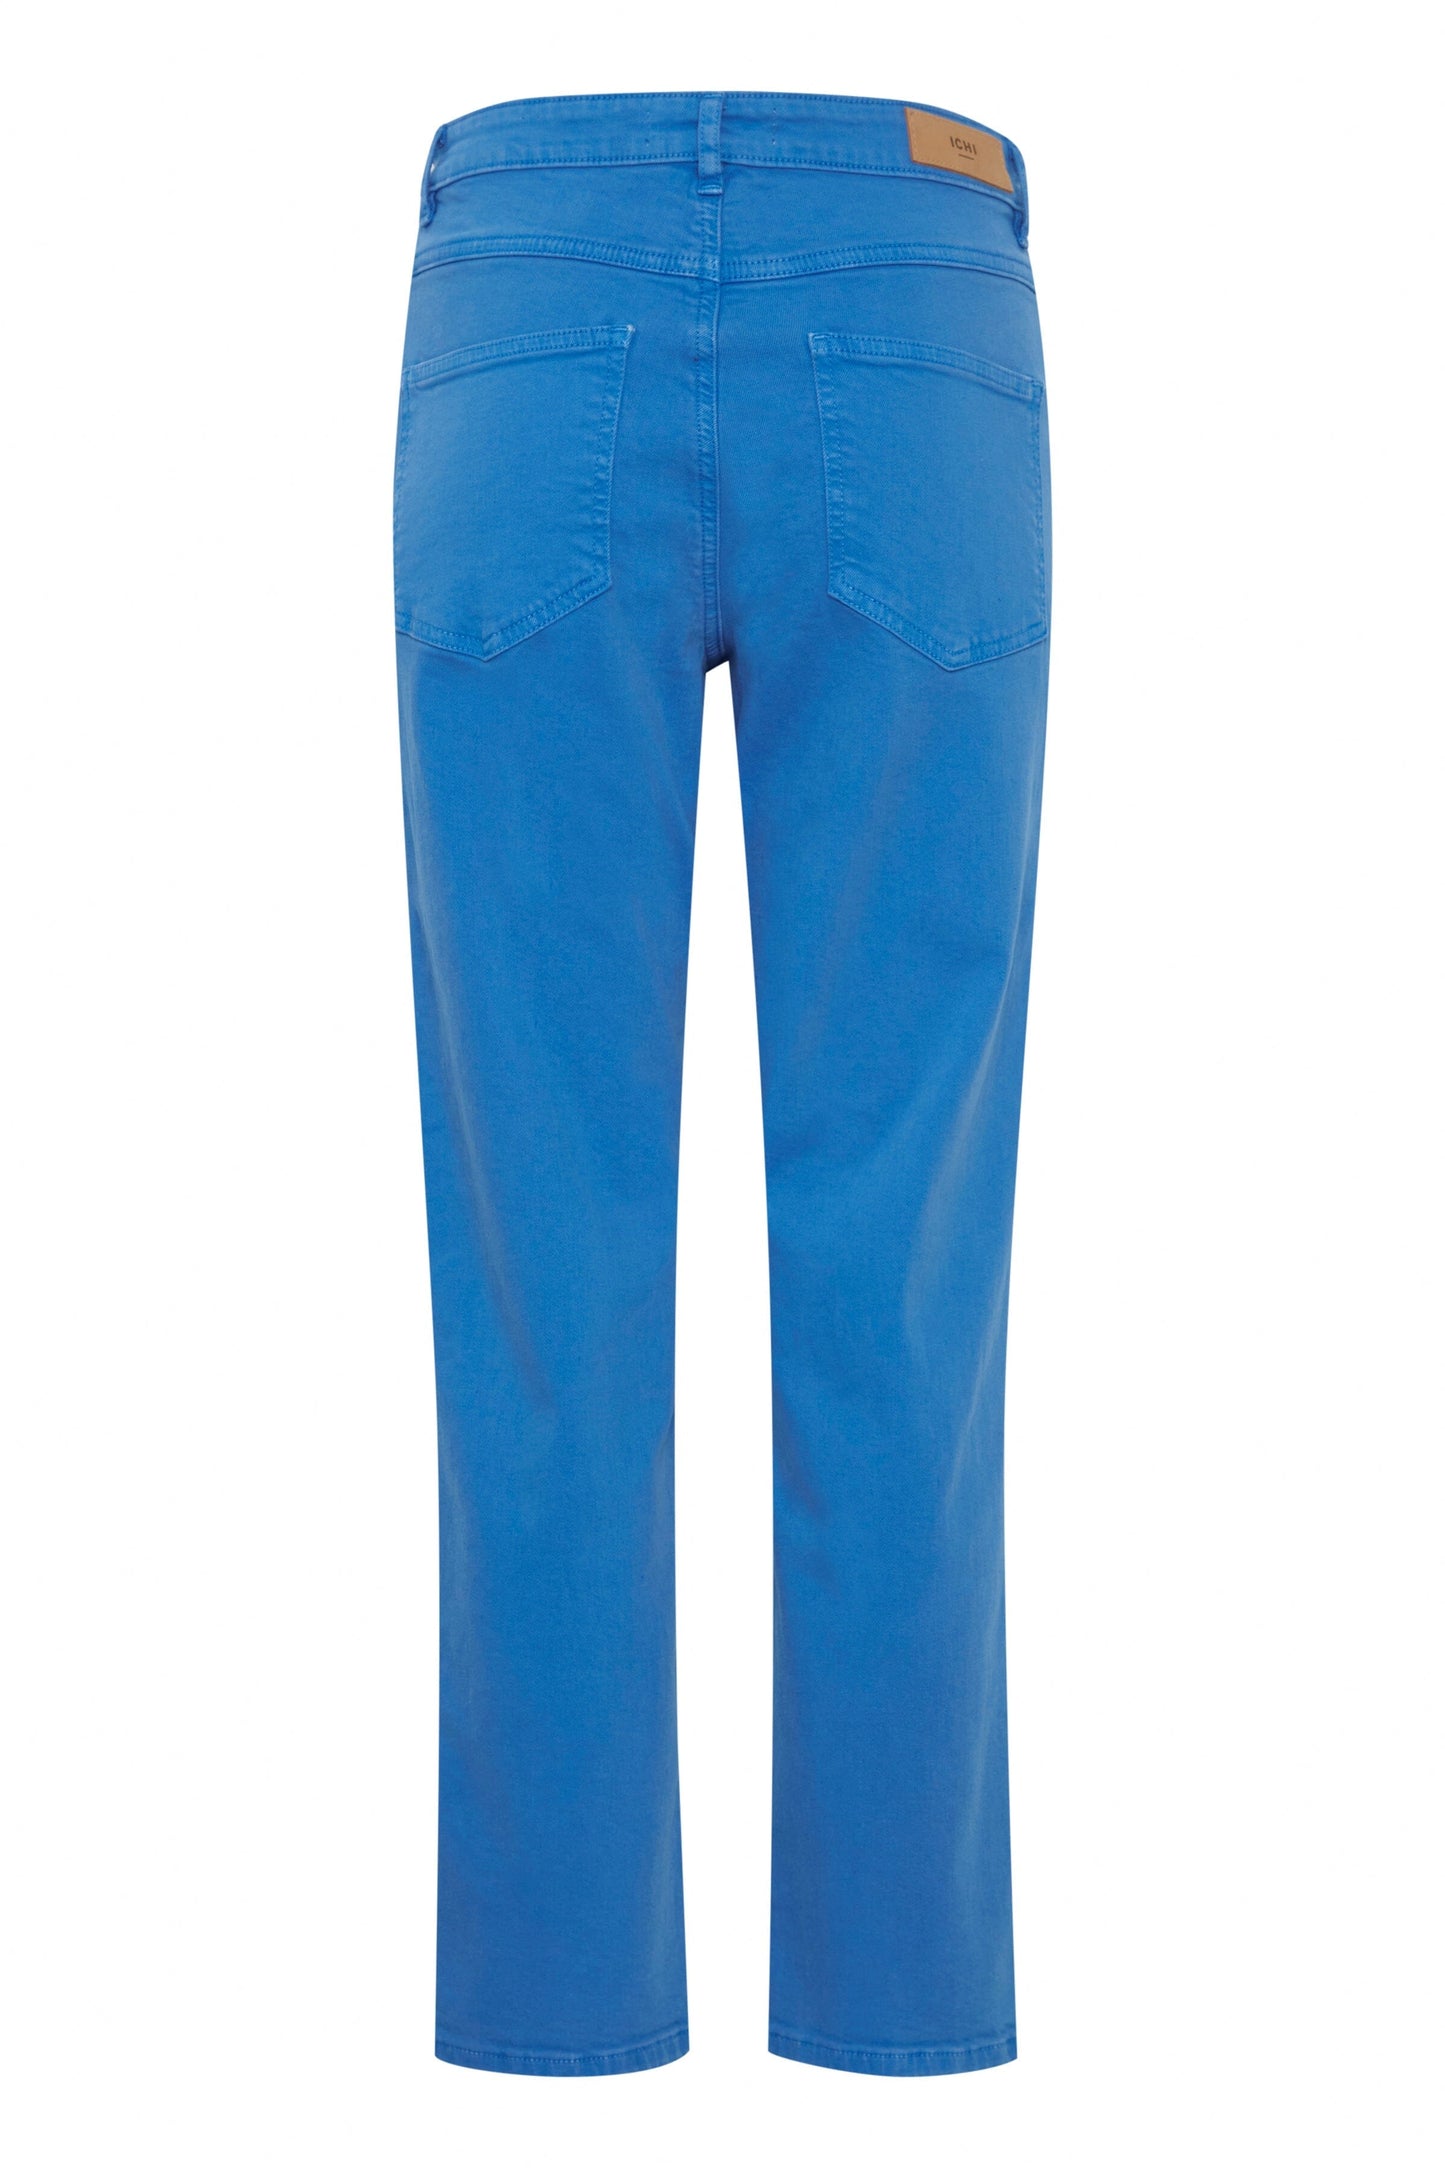 Cenny Raven Jeans in Blue Jeans Ichi 